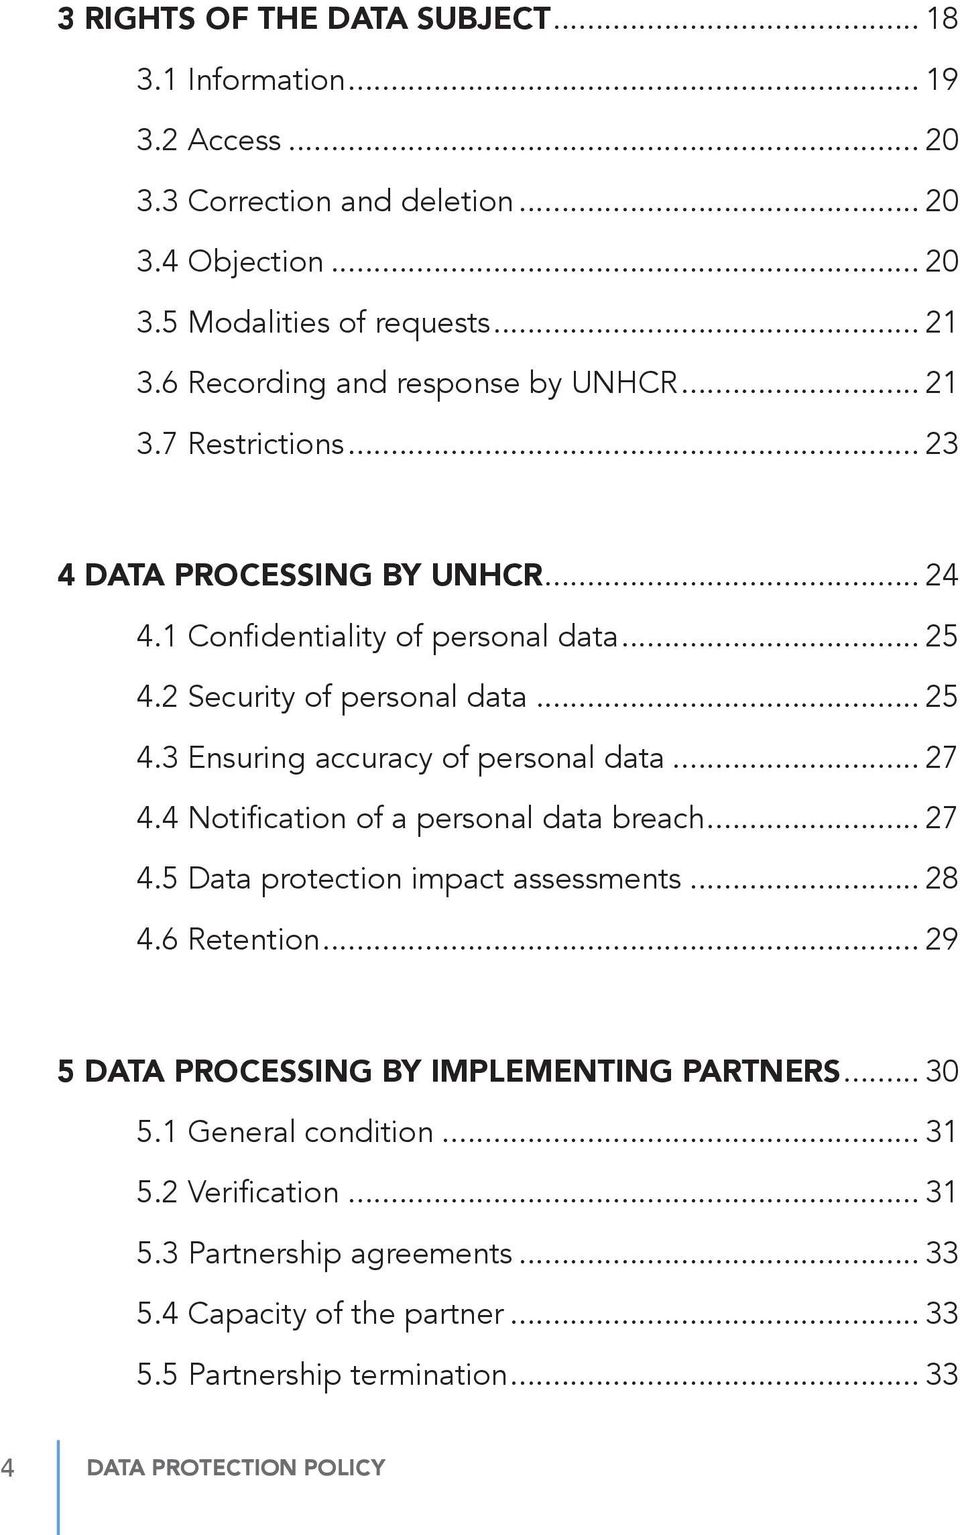 .. 27 4.4 Notification of a personal data breach... 27 4.5 Data protection impact assessments... 28 4.6 Retention... 29 5 DATA PROCESSING BY IMPLEMENTING PARTNERS... 30 5.